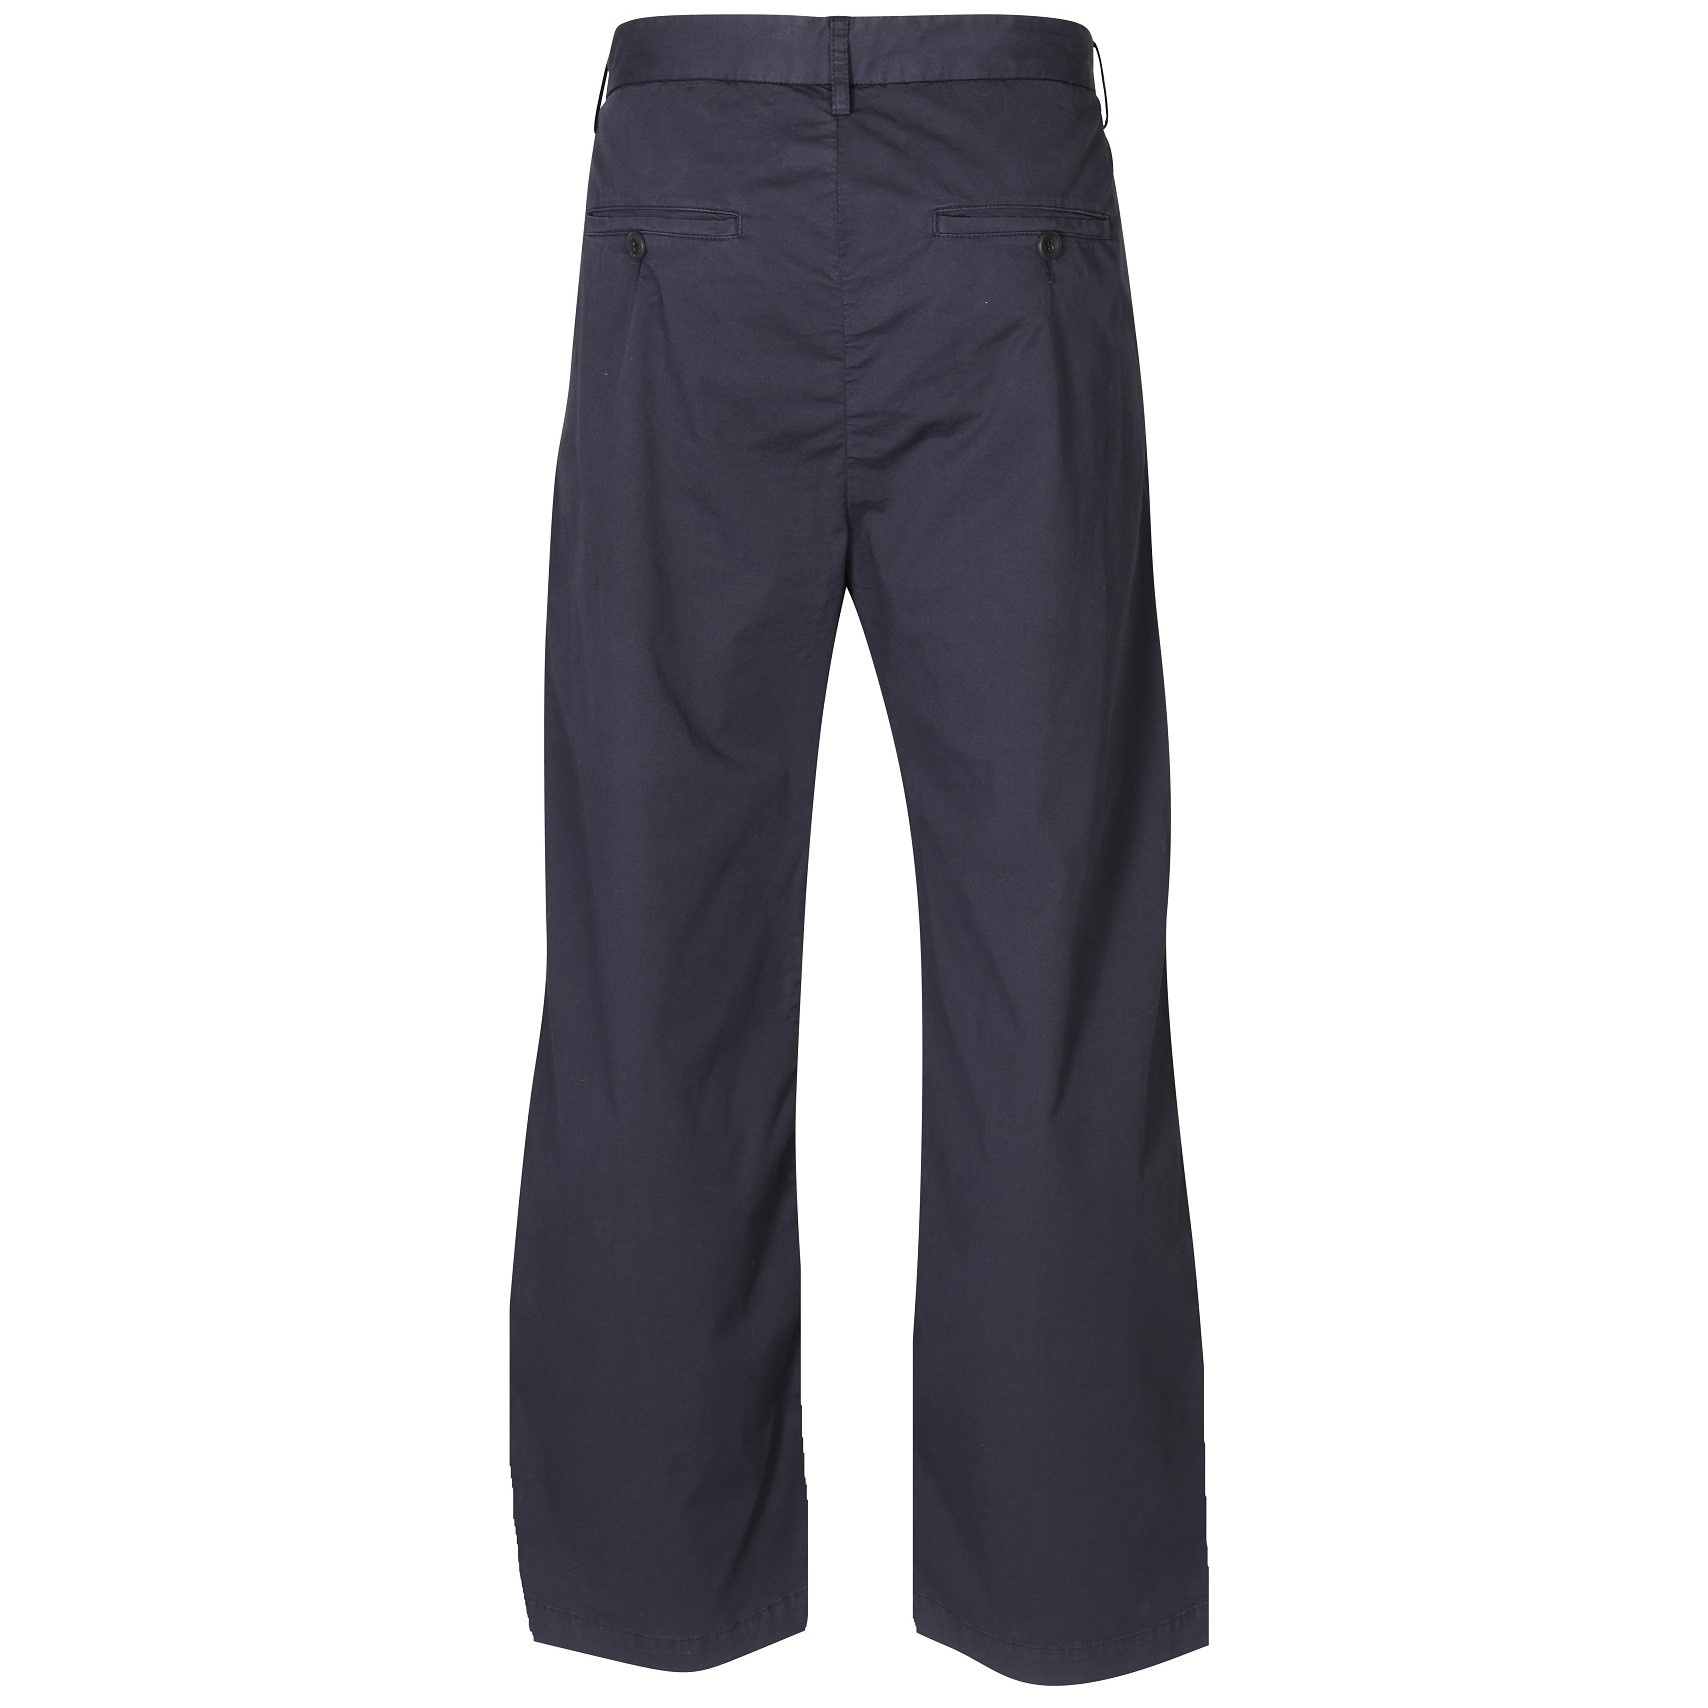 HANNES ROETHER Cotton Pant in Tornado S